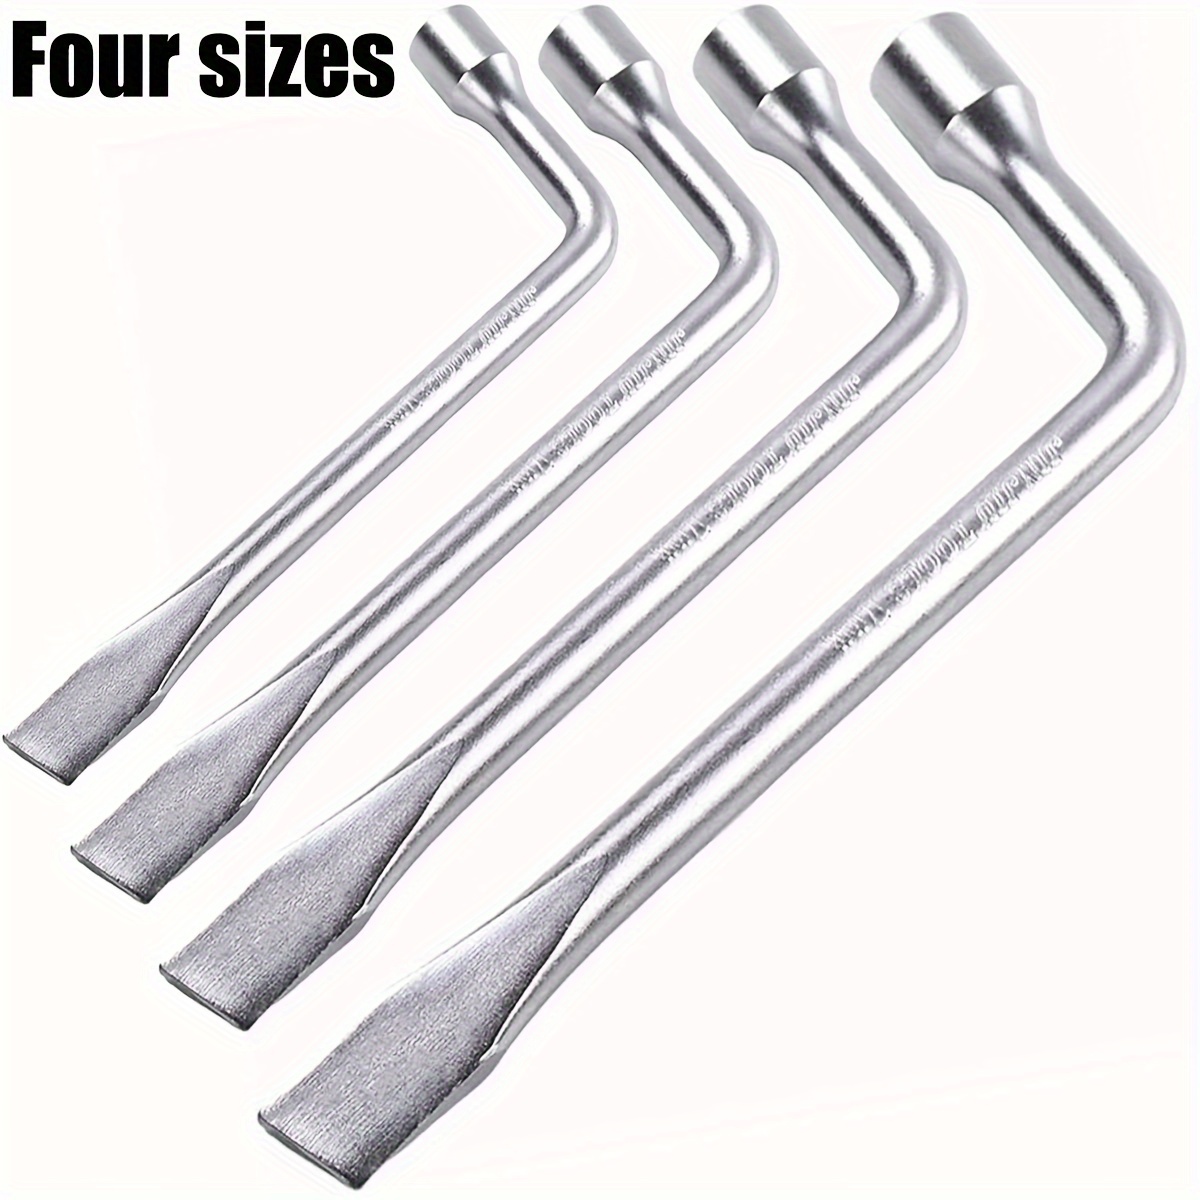 

Newshark L-shaped Vehicle Tire Lug Wrench - Slotted End Socket For Effortless Wheel Nut Removal, Robust Metal Construction Torque Multiplier Tool For Tire Maintenance